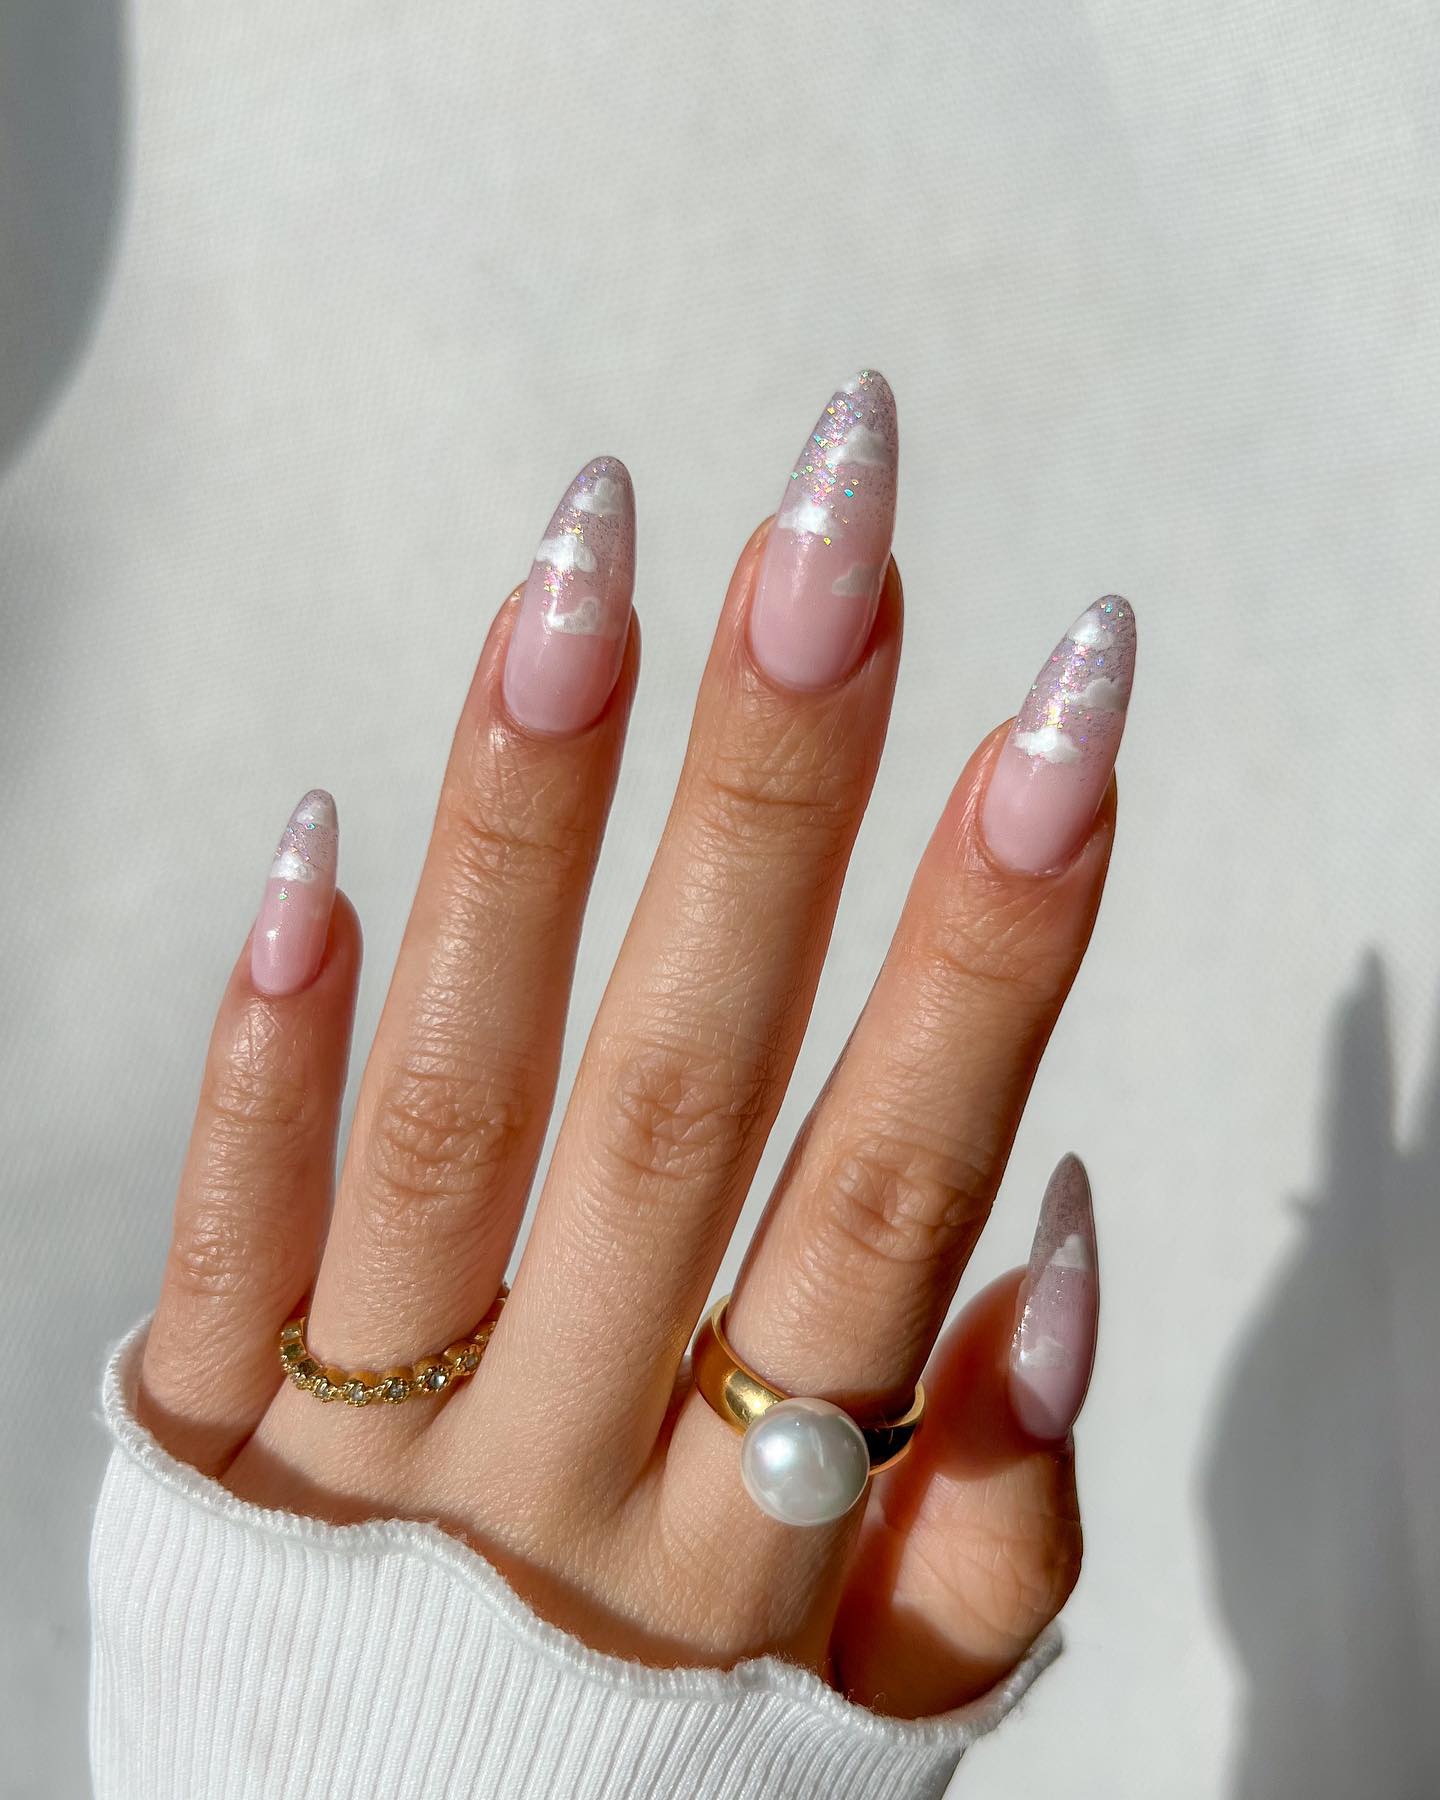 100 Pretty Spring Nail Designs To Try This Year images 33